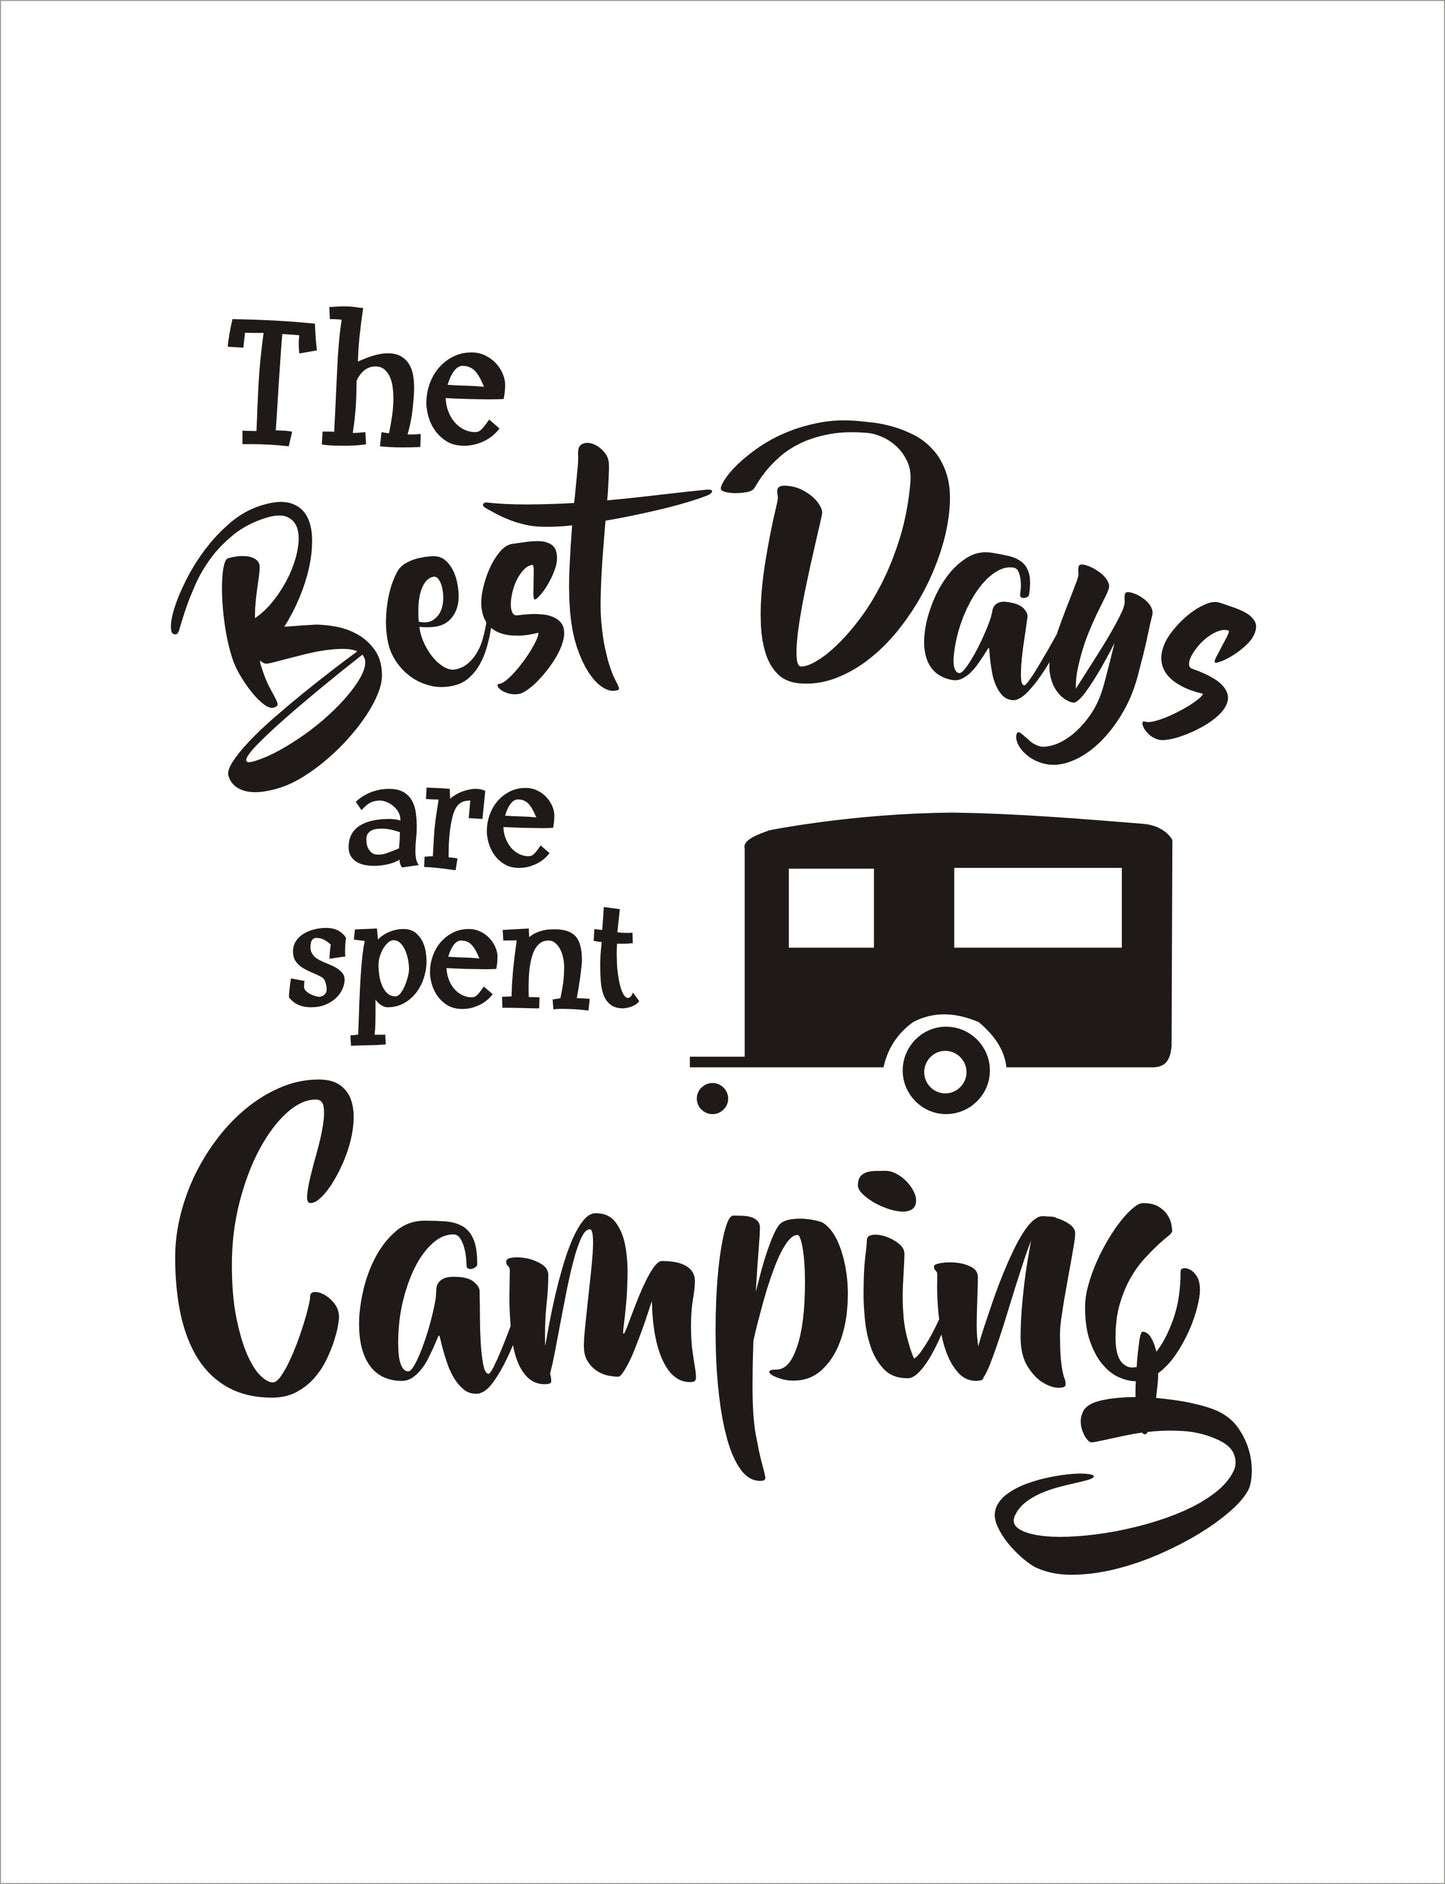 The Best Days are spent Camping Vinyl Sticker Decal Graphic | RV Slide Decal RV Door Decal Travel Trailer Camper